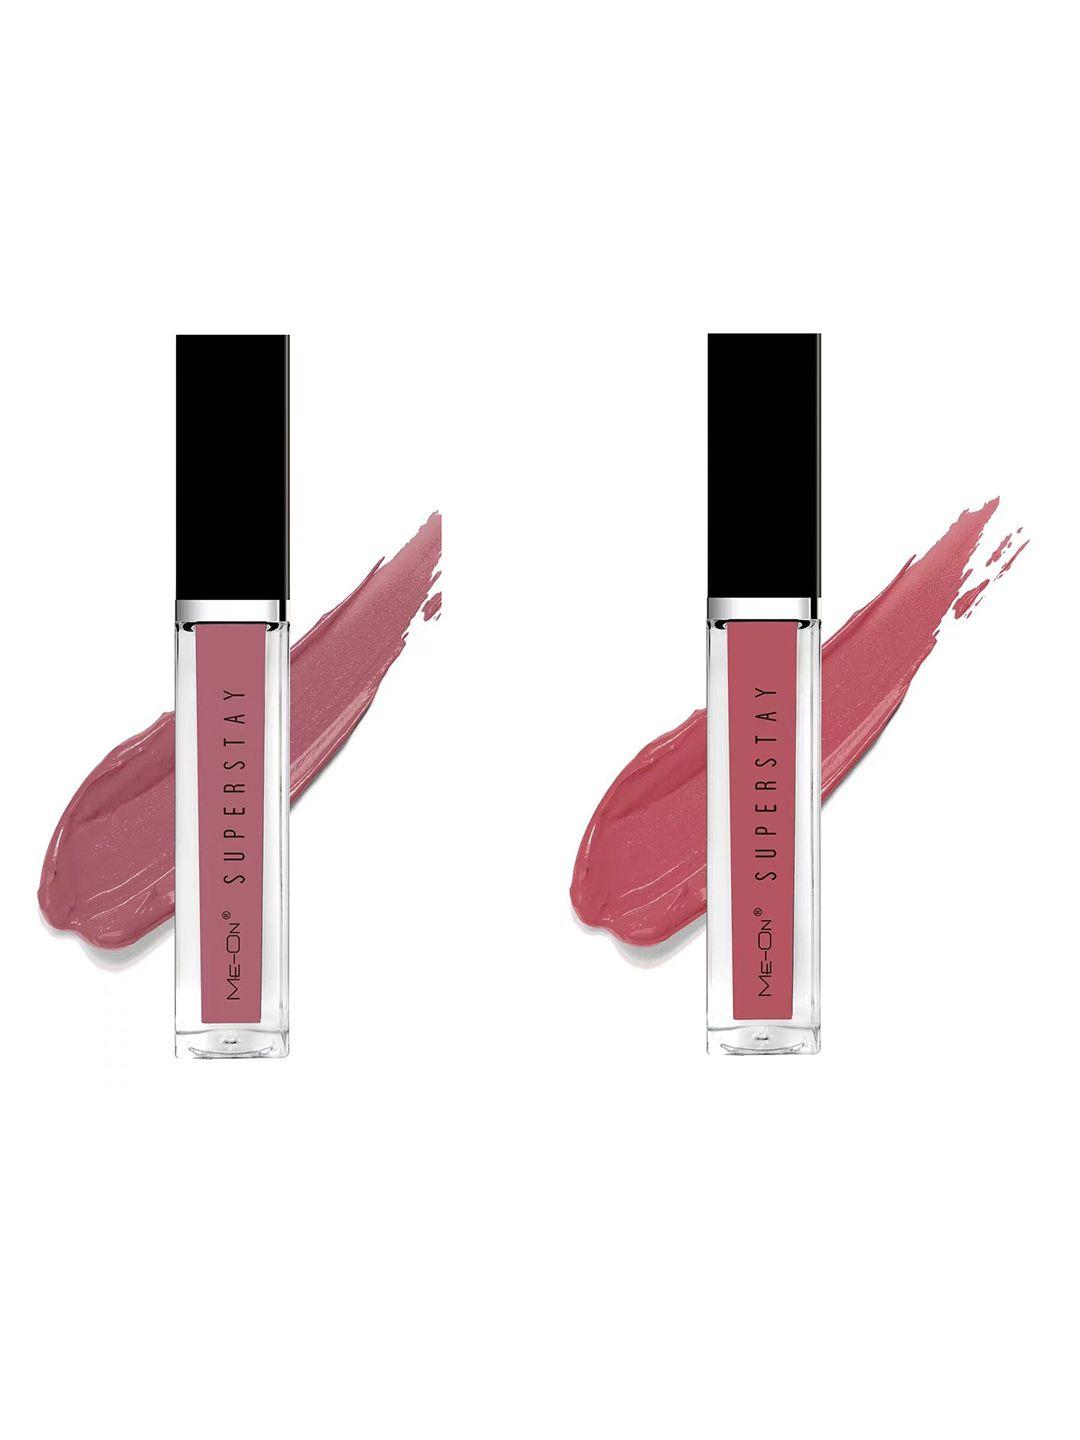 me-on-superstay-set-of-2-glossy-lip-gloss-12-ml-each---mysterious-nude-22-&-kinda-sexy-22